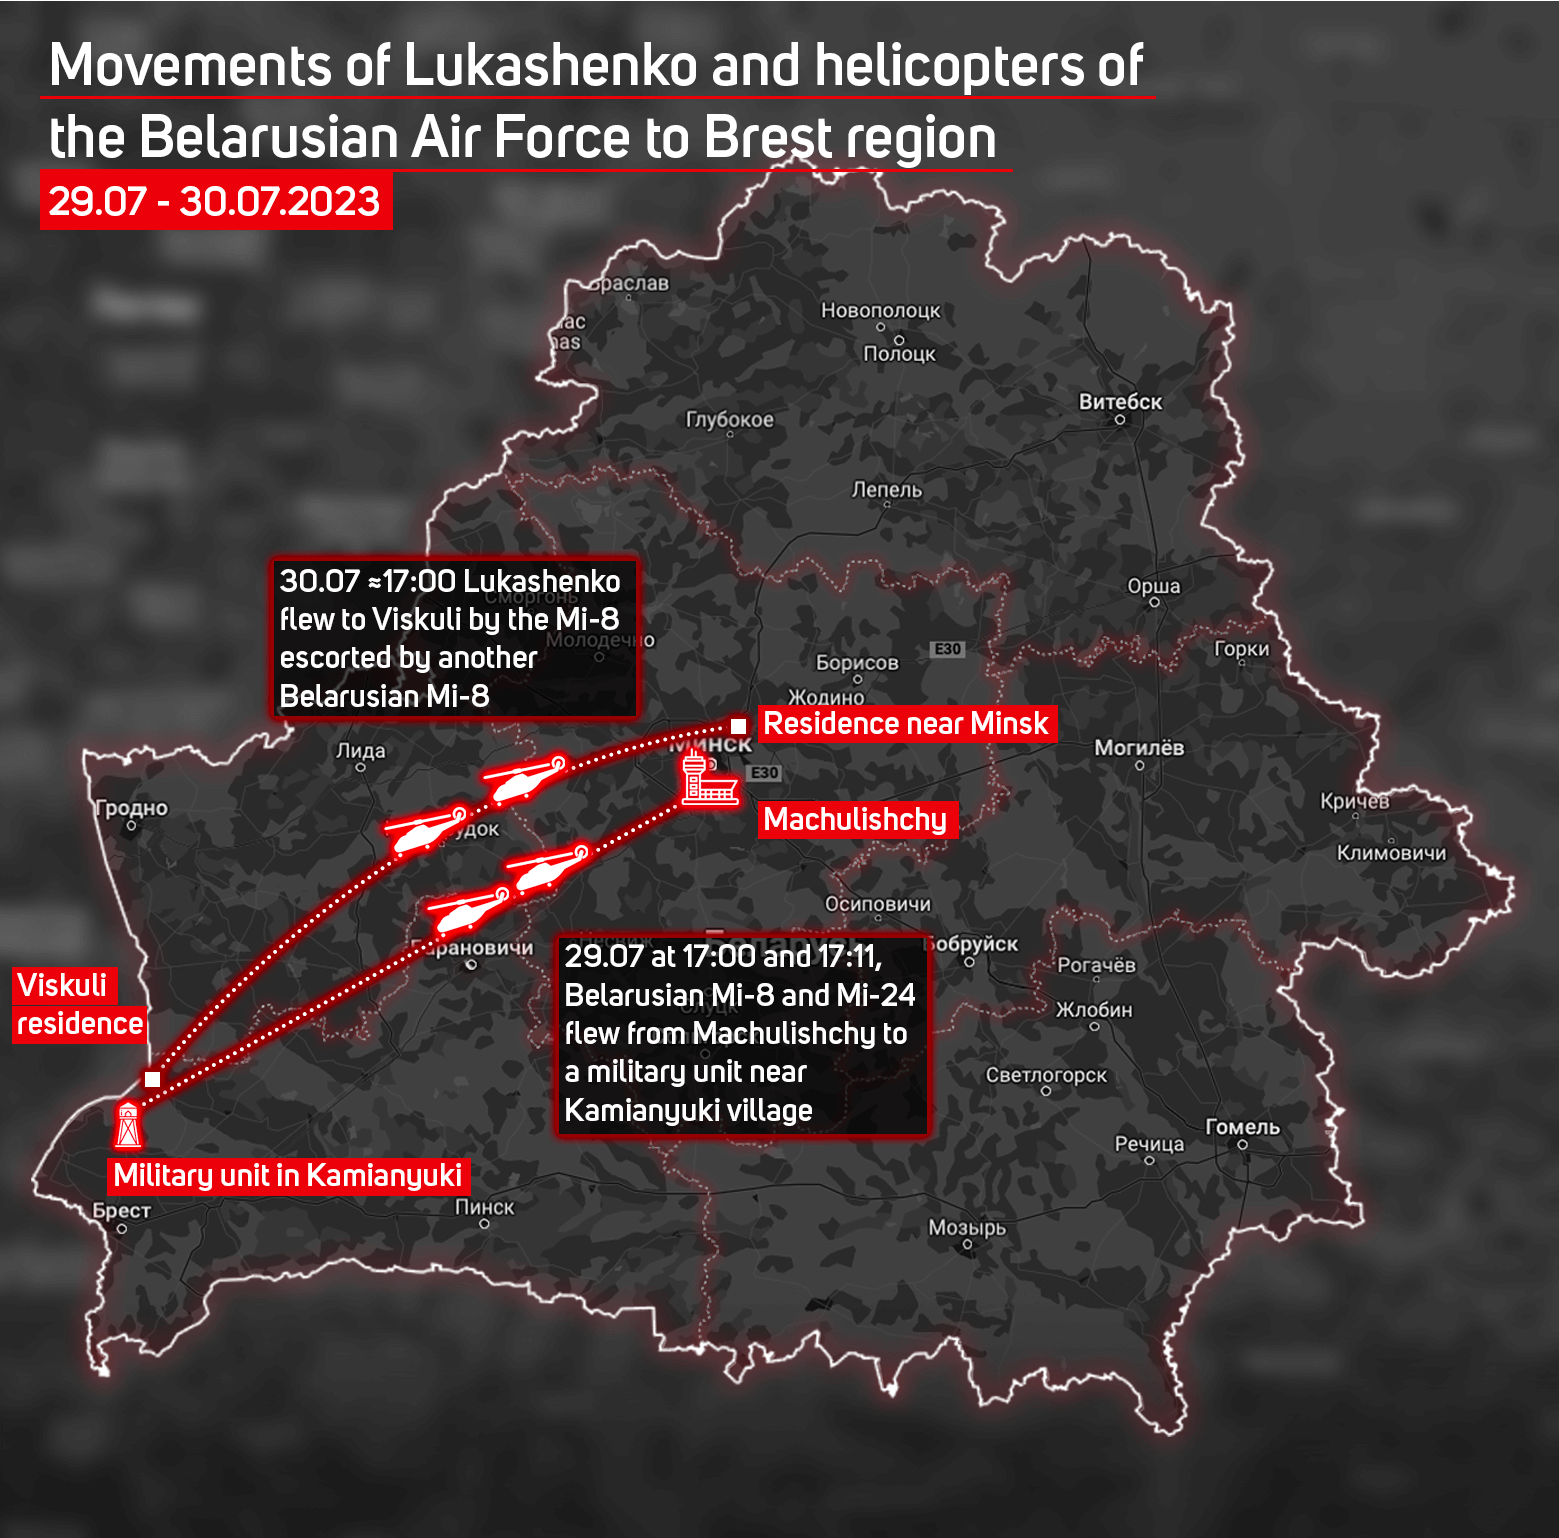 Belarusian helicopters flew into Poland, and Lukashenko has been in Viskuli for 3 days: what’s going on at the Polish border?